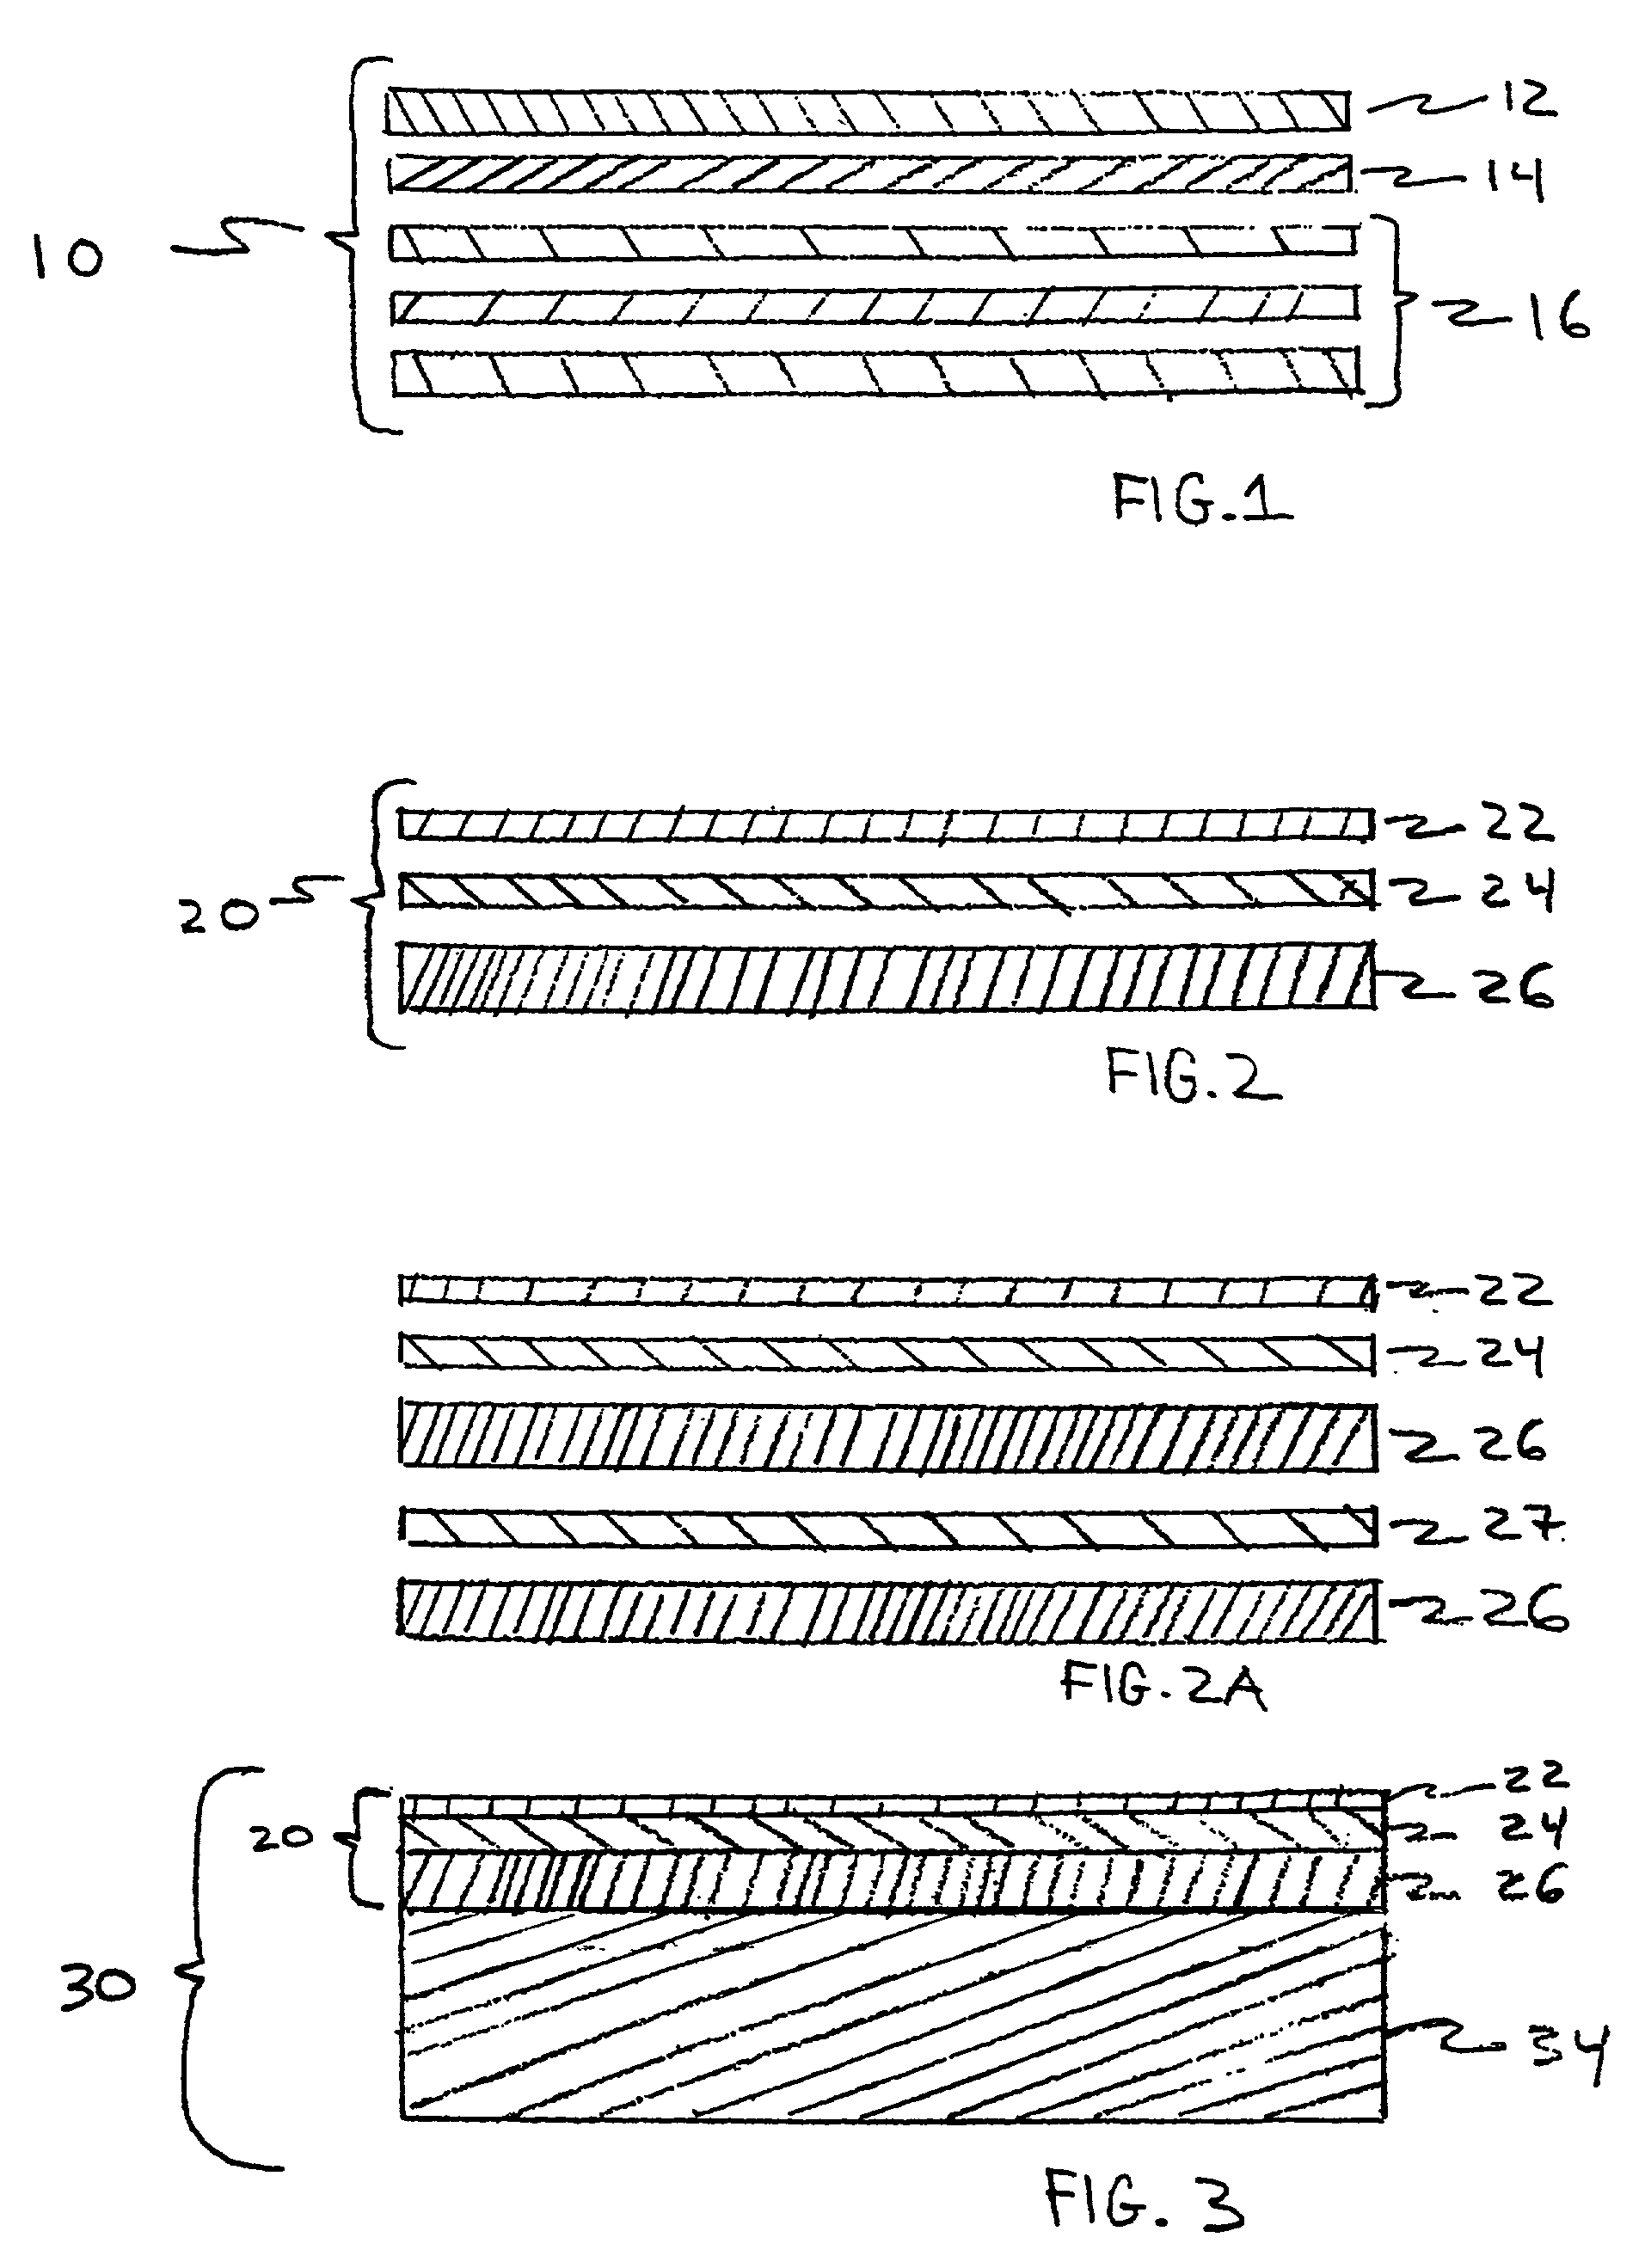 Decorative laminate assembly and method of producing same